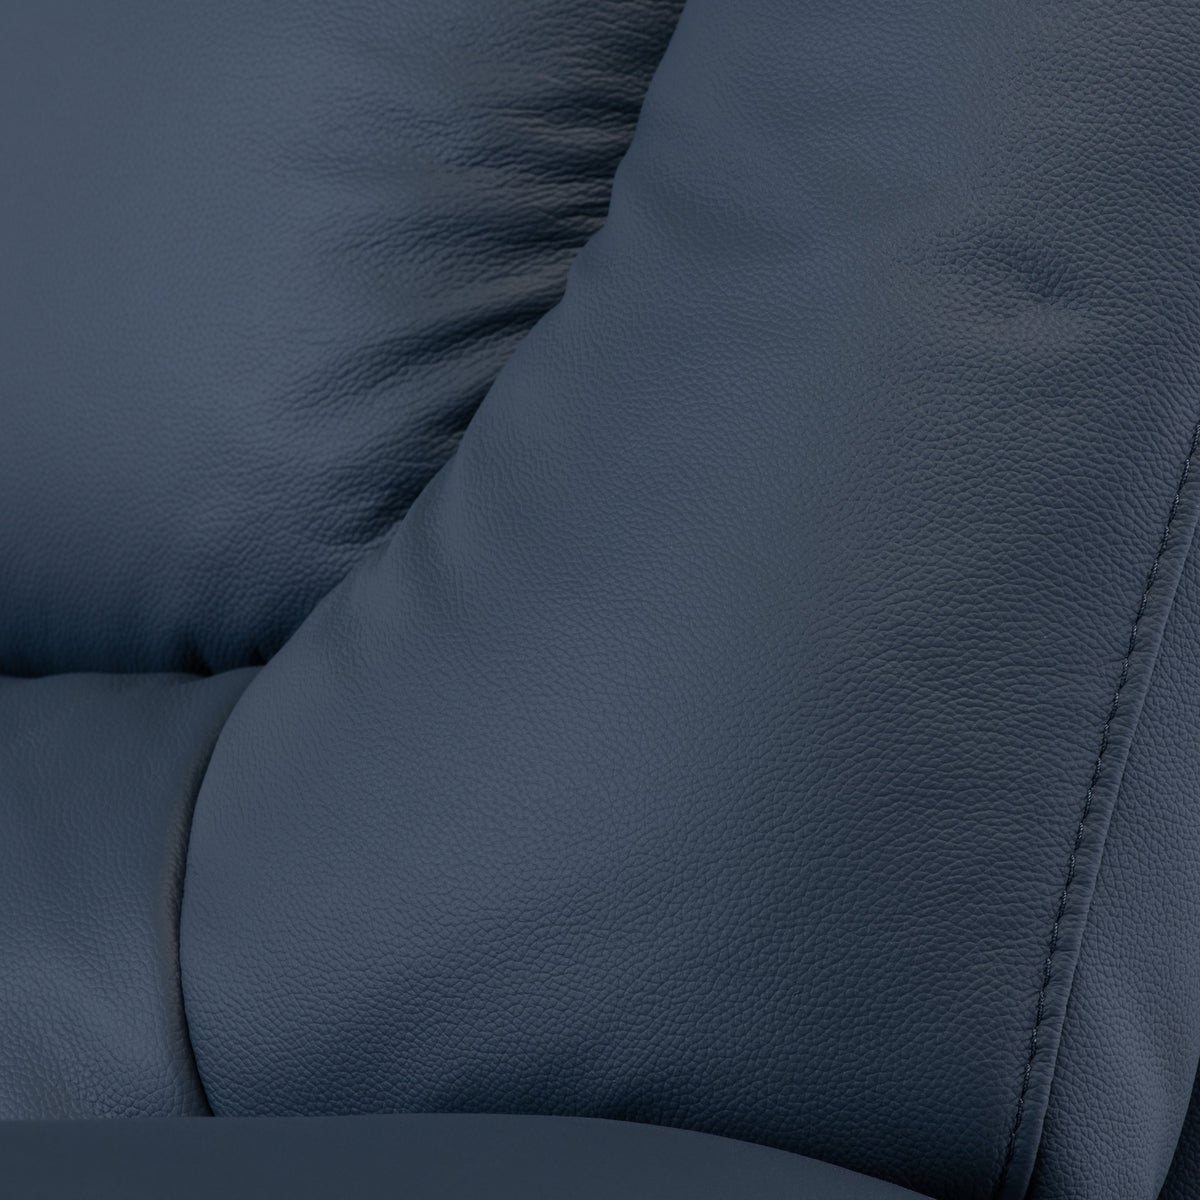 Baxter Blue Leather Electric Reclining Armchair from Roseland Furniture